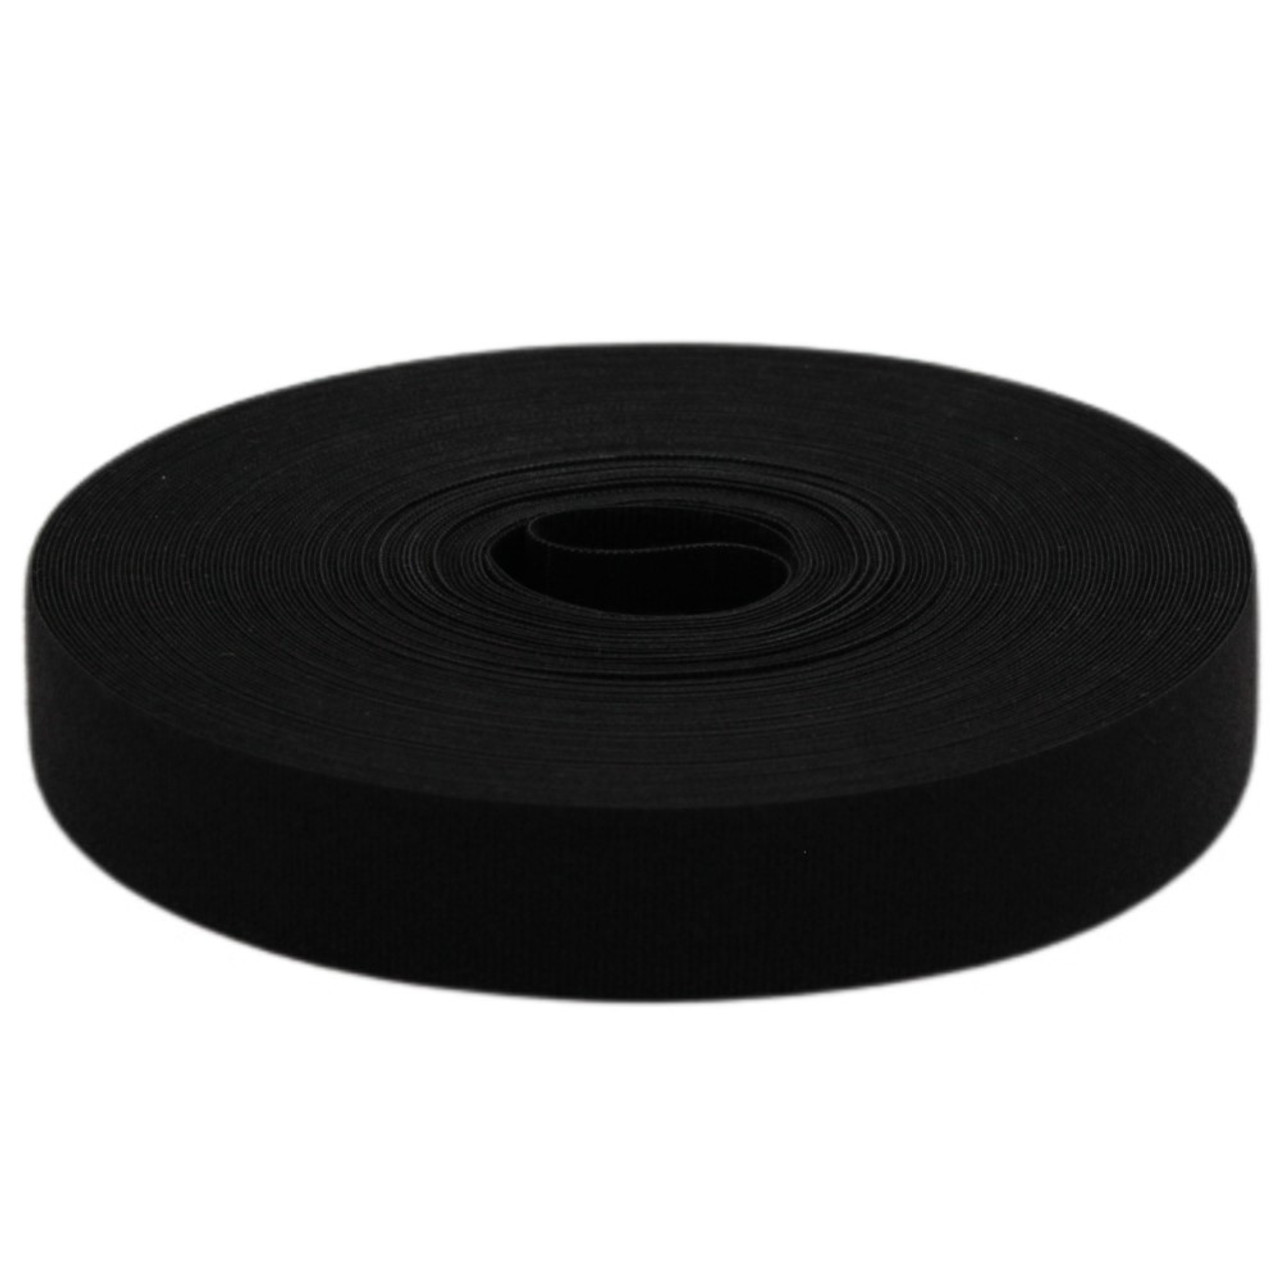 VELCRO® Brand ONE-WRAP® Tape 4 x 25 yard roll sold by Industrial